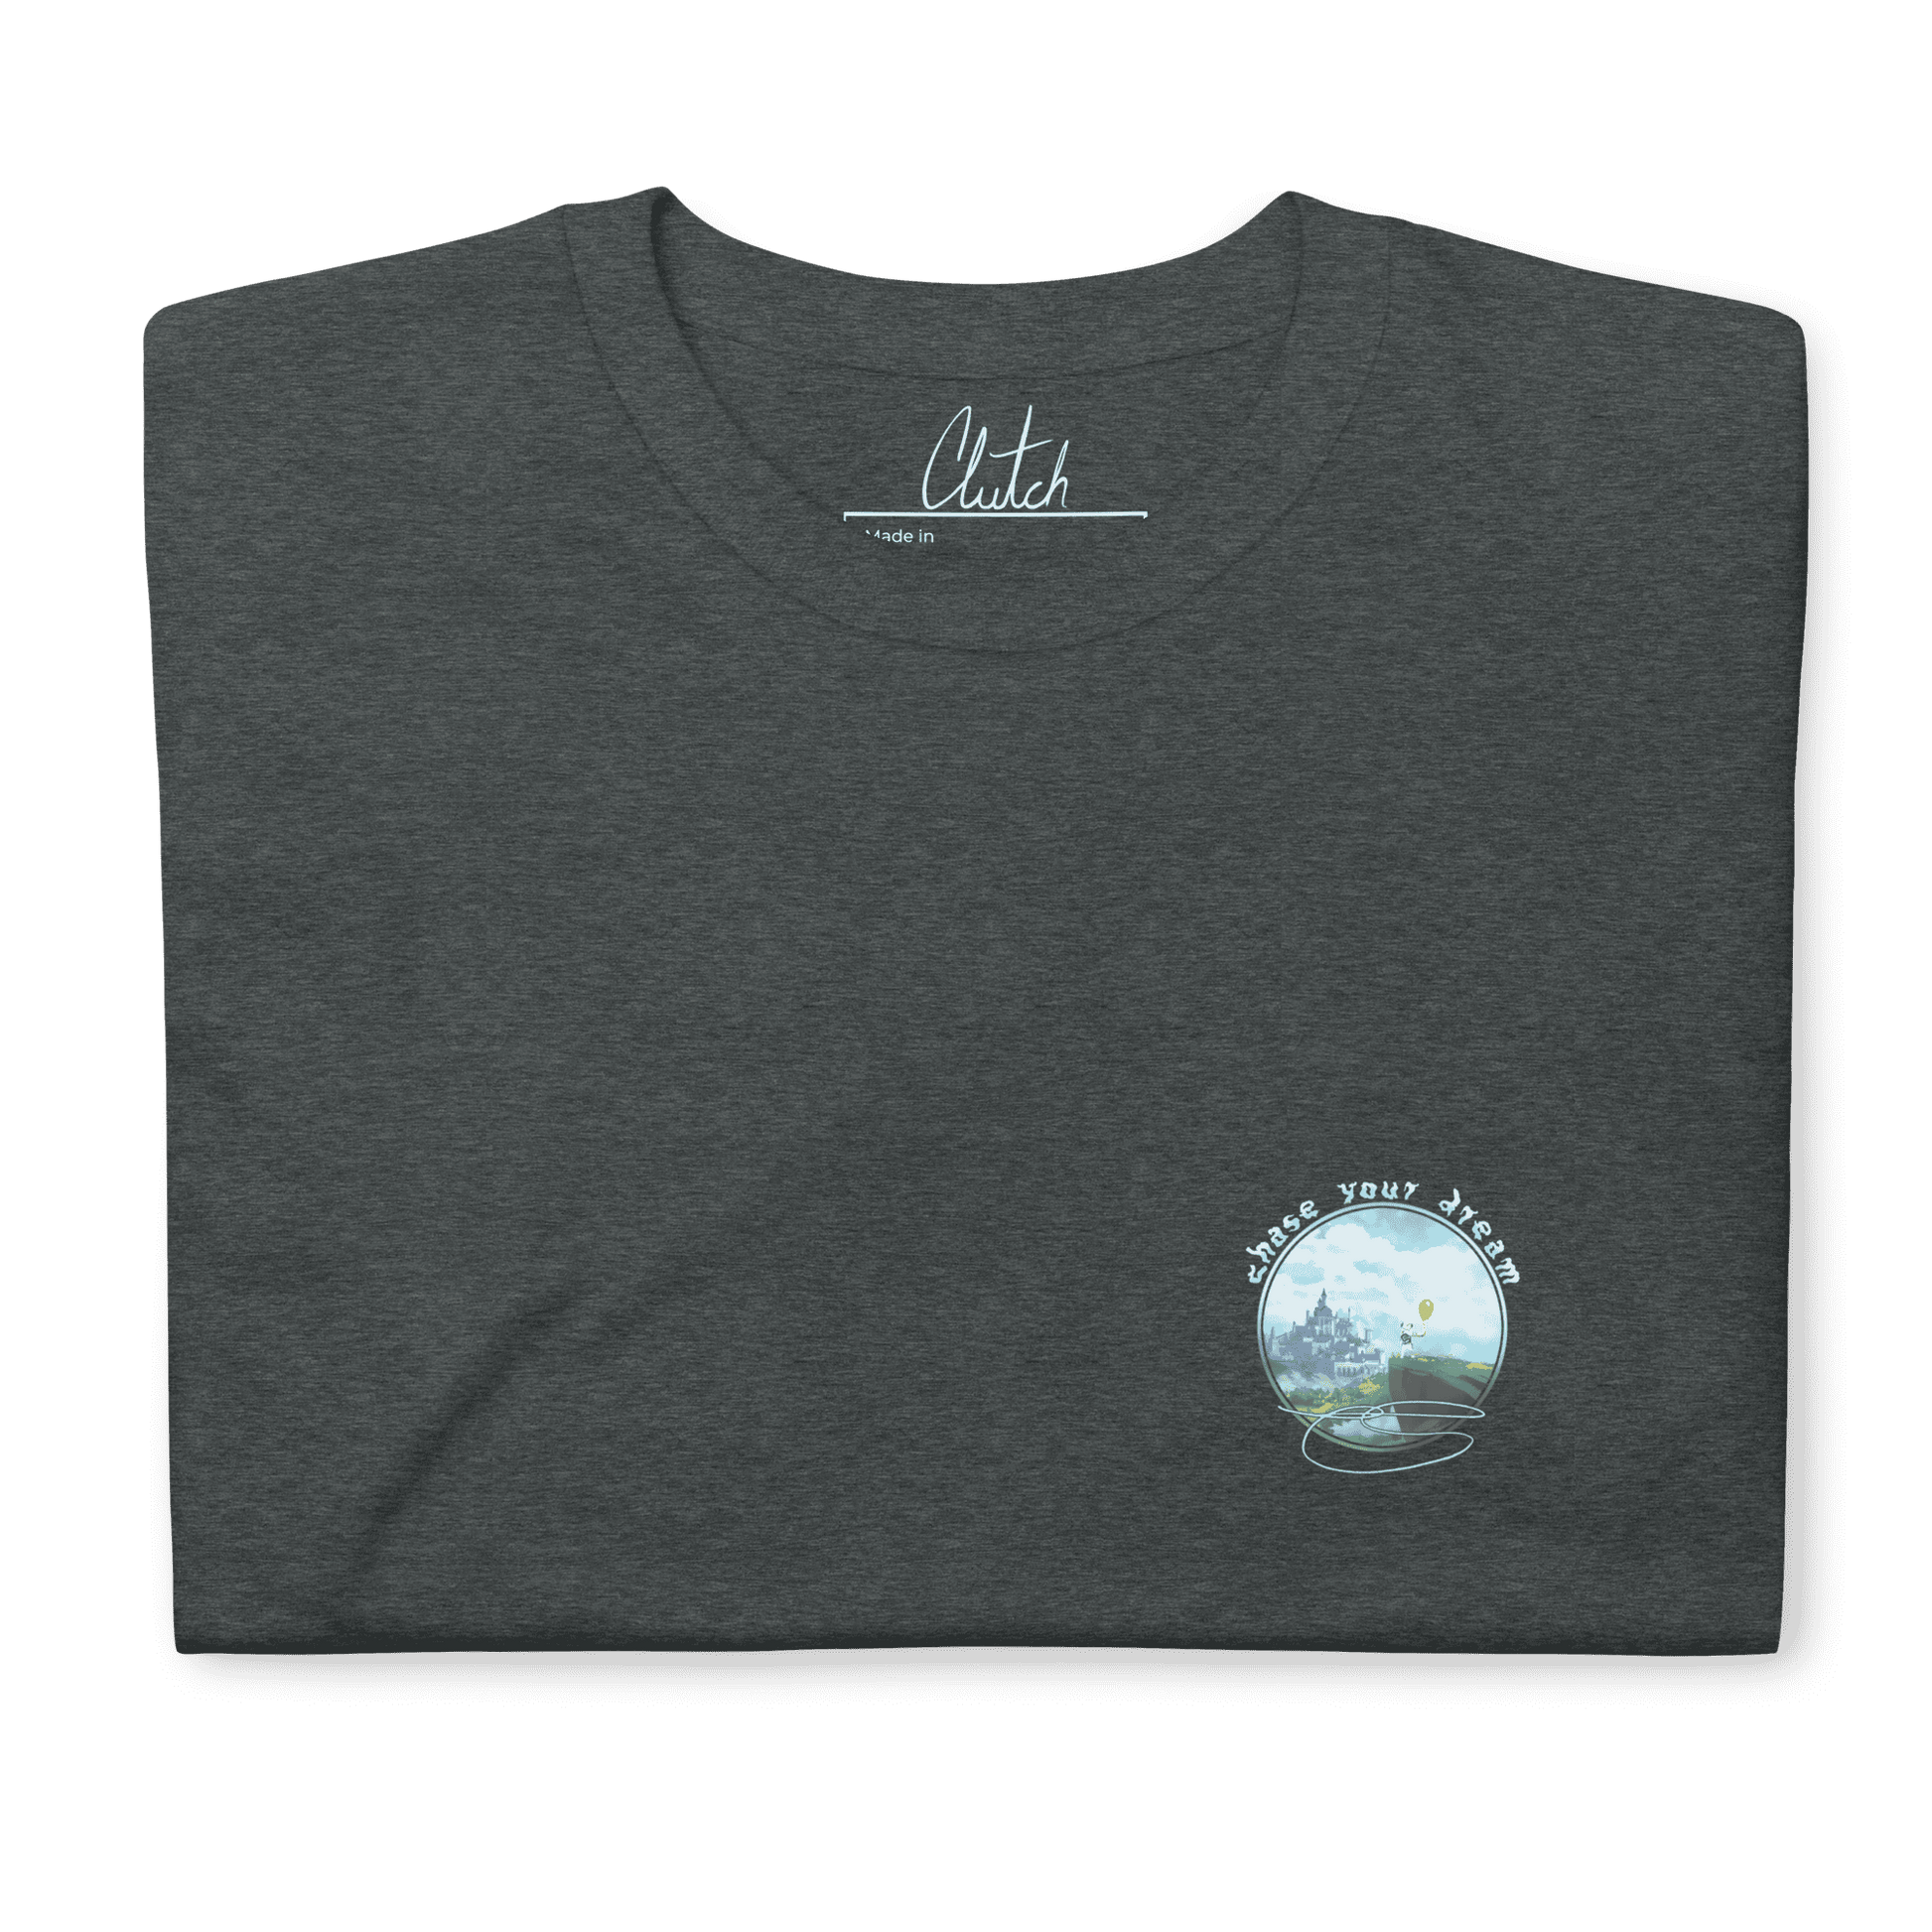 Chase Saldate | Chase Your Dream Patch T-shirt - Clutch - Clothing